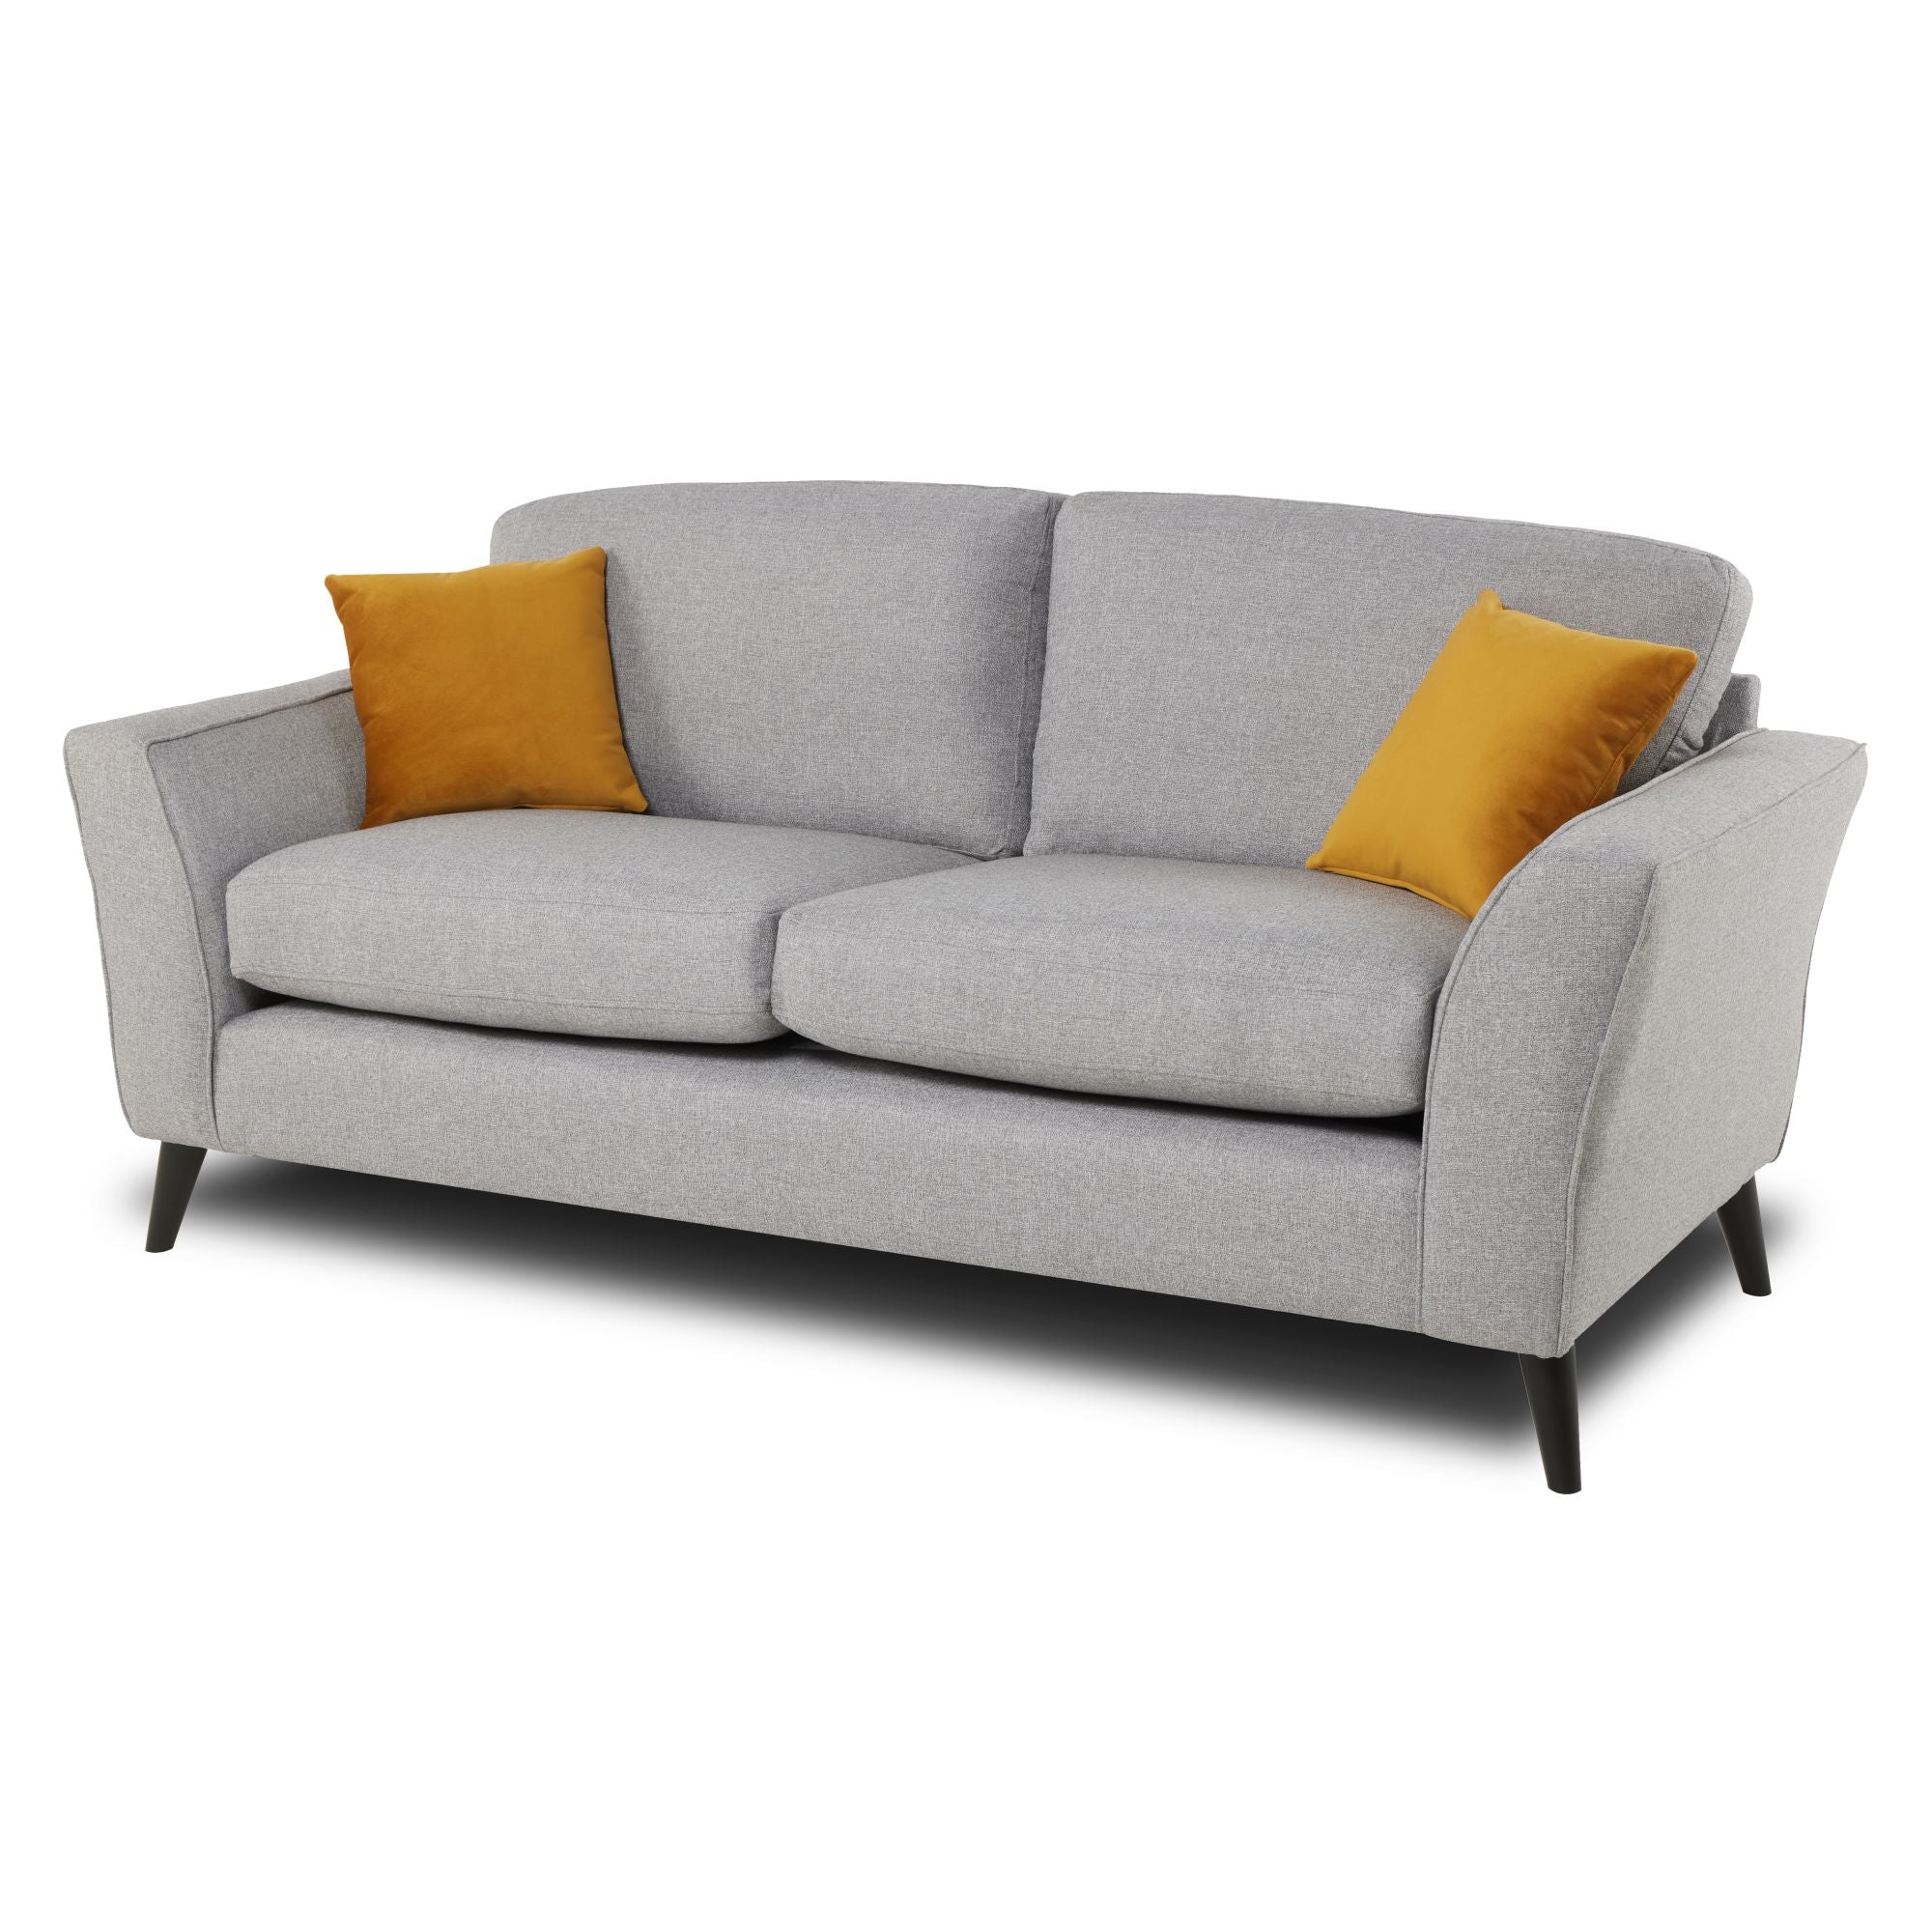 Libby 3 seater sofa in silver on an angle with a white background 